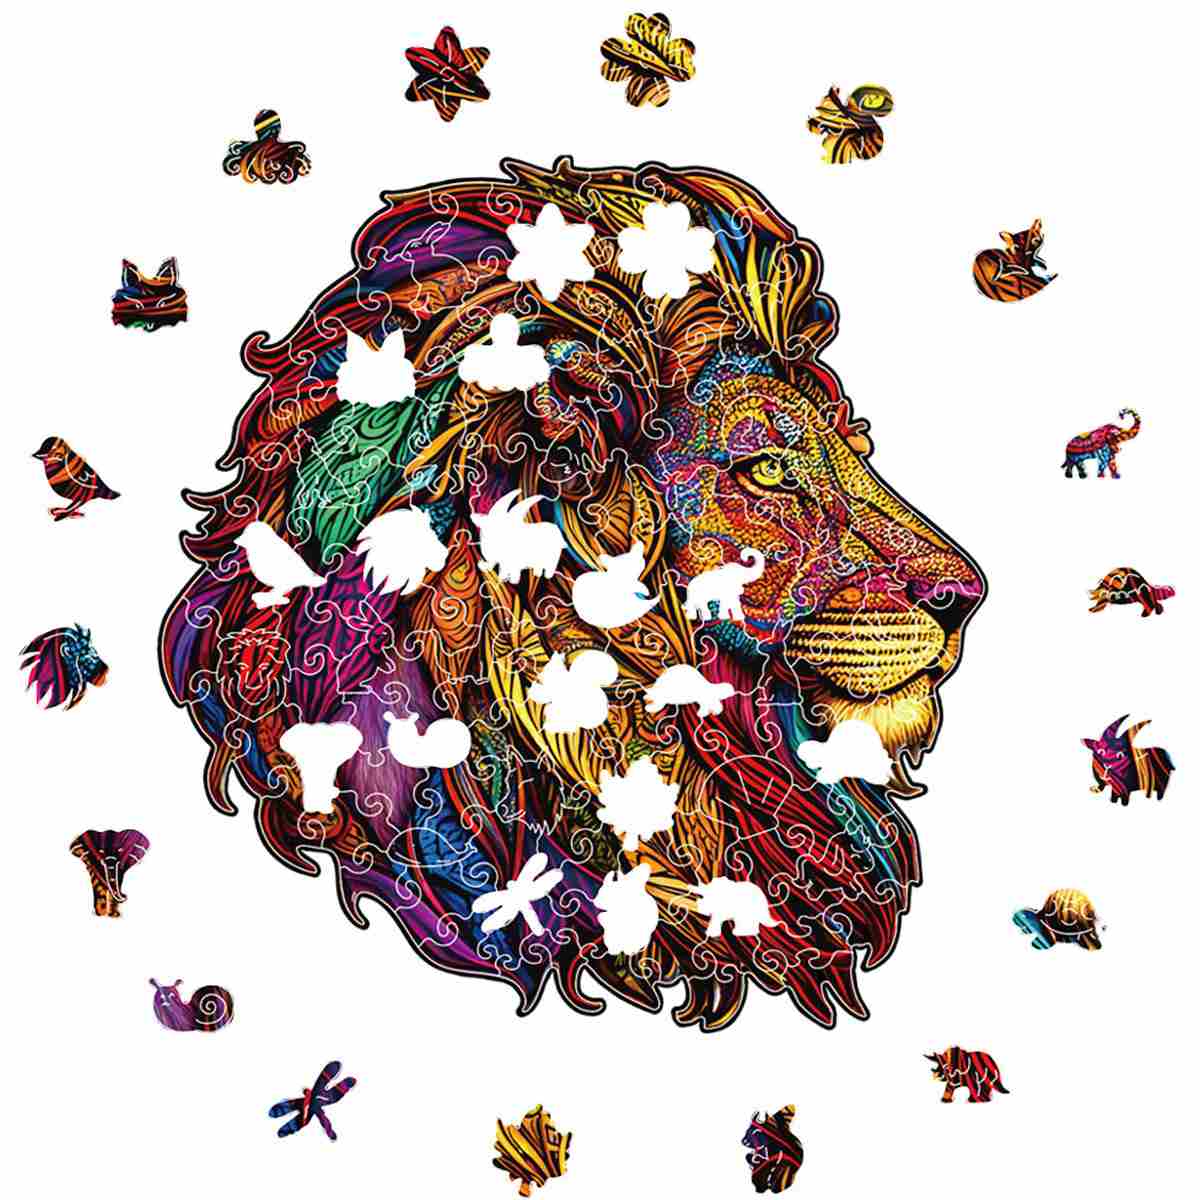 Animal Jigsaw Puzzle > Wooden Jigsaw Puzzle > Jigsaw Puzzle Majestic Lion - Jigsaw Puzzle